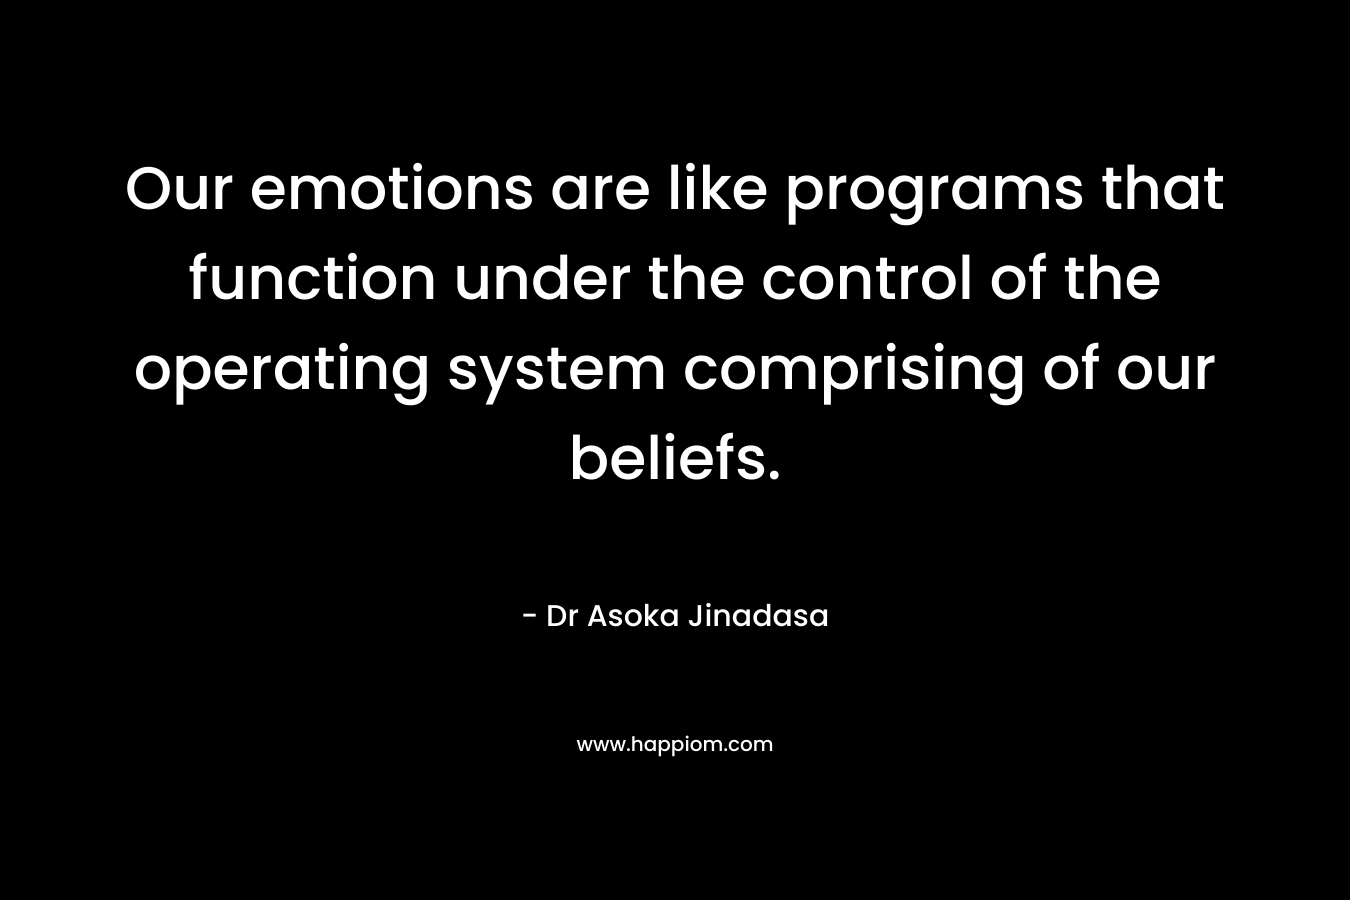 Our emotions are like programs that function under the control of the operating system comprising of our beliefs. – Dr Asoka Jinadasa